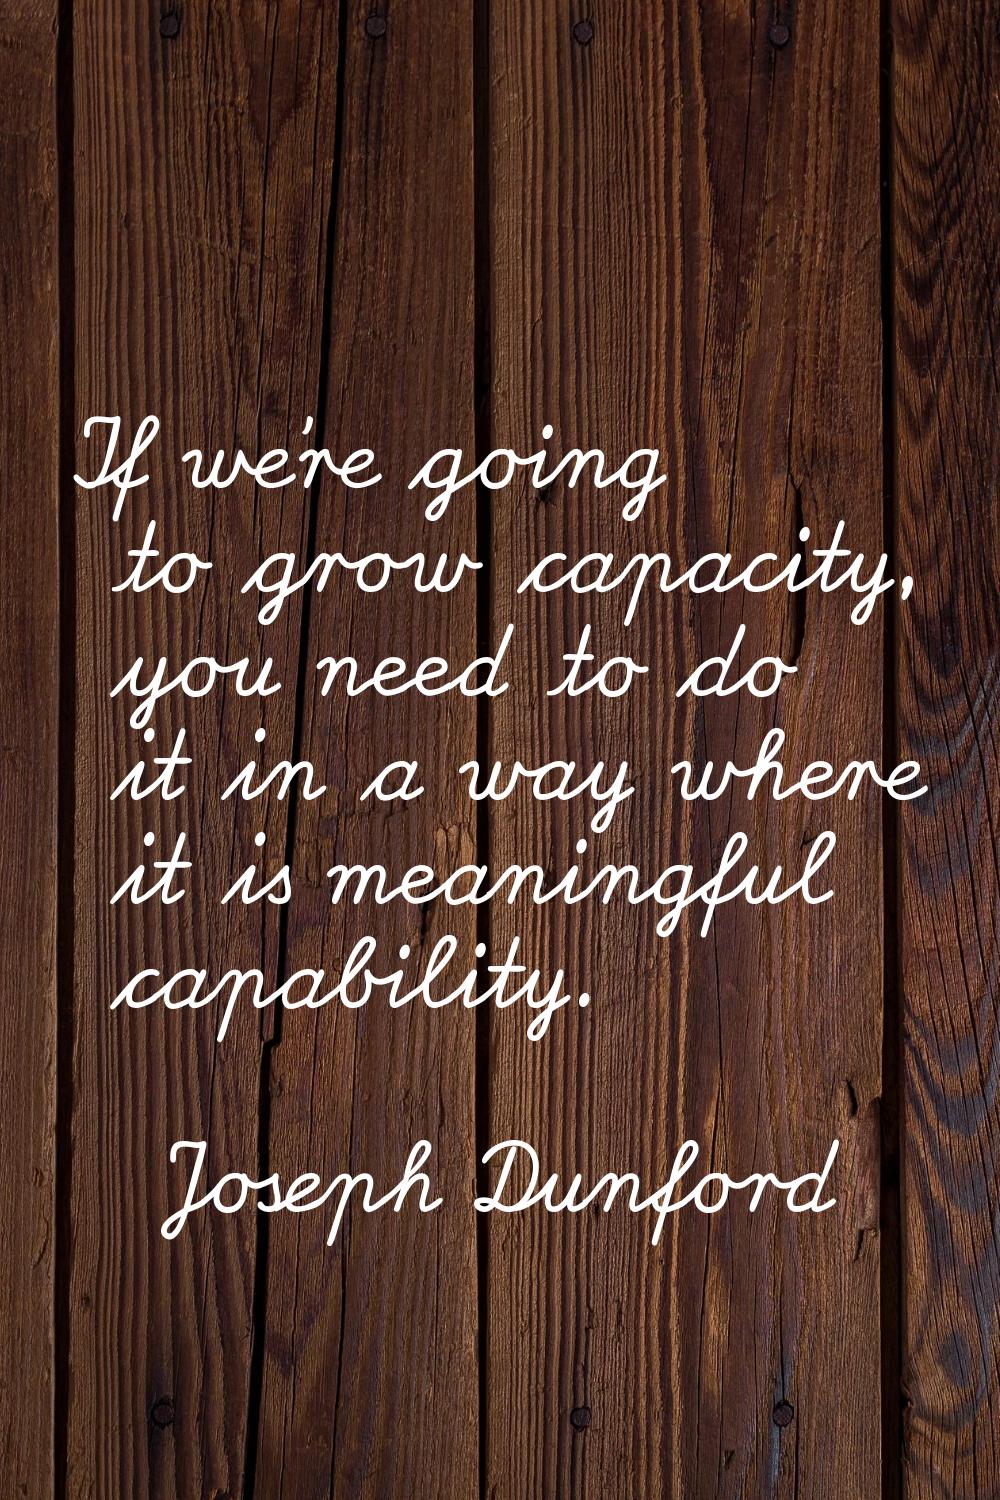 If we're going to grow capacity, you need to do it in a way where it is meaningful capability.